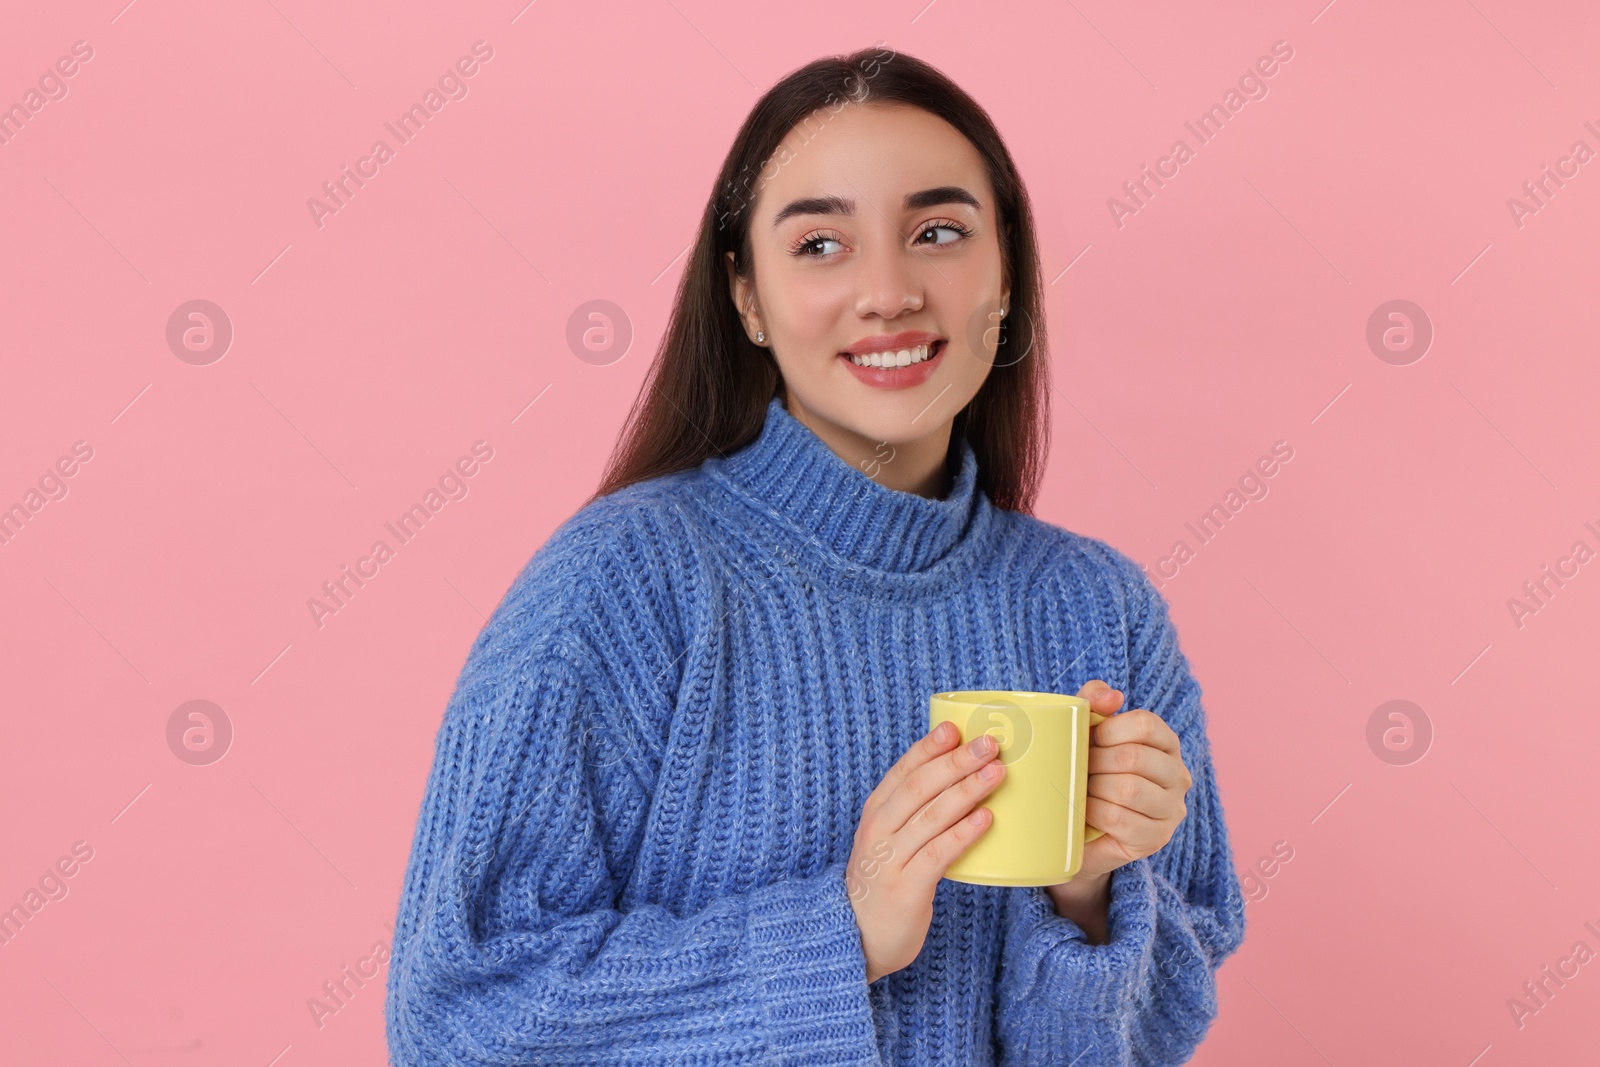 Photo of Happy young woman holding yellow ceramic mug on pink background